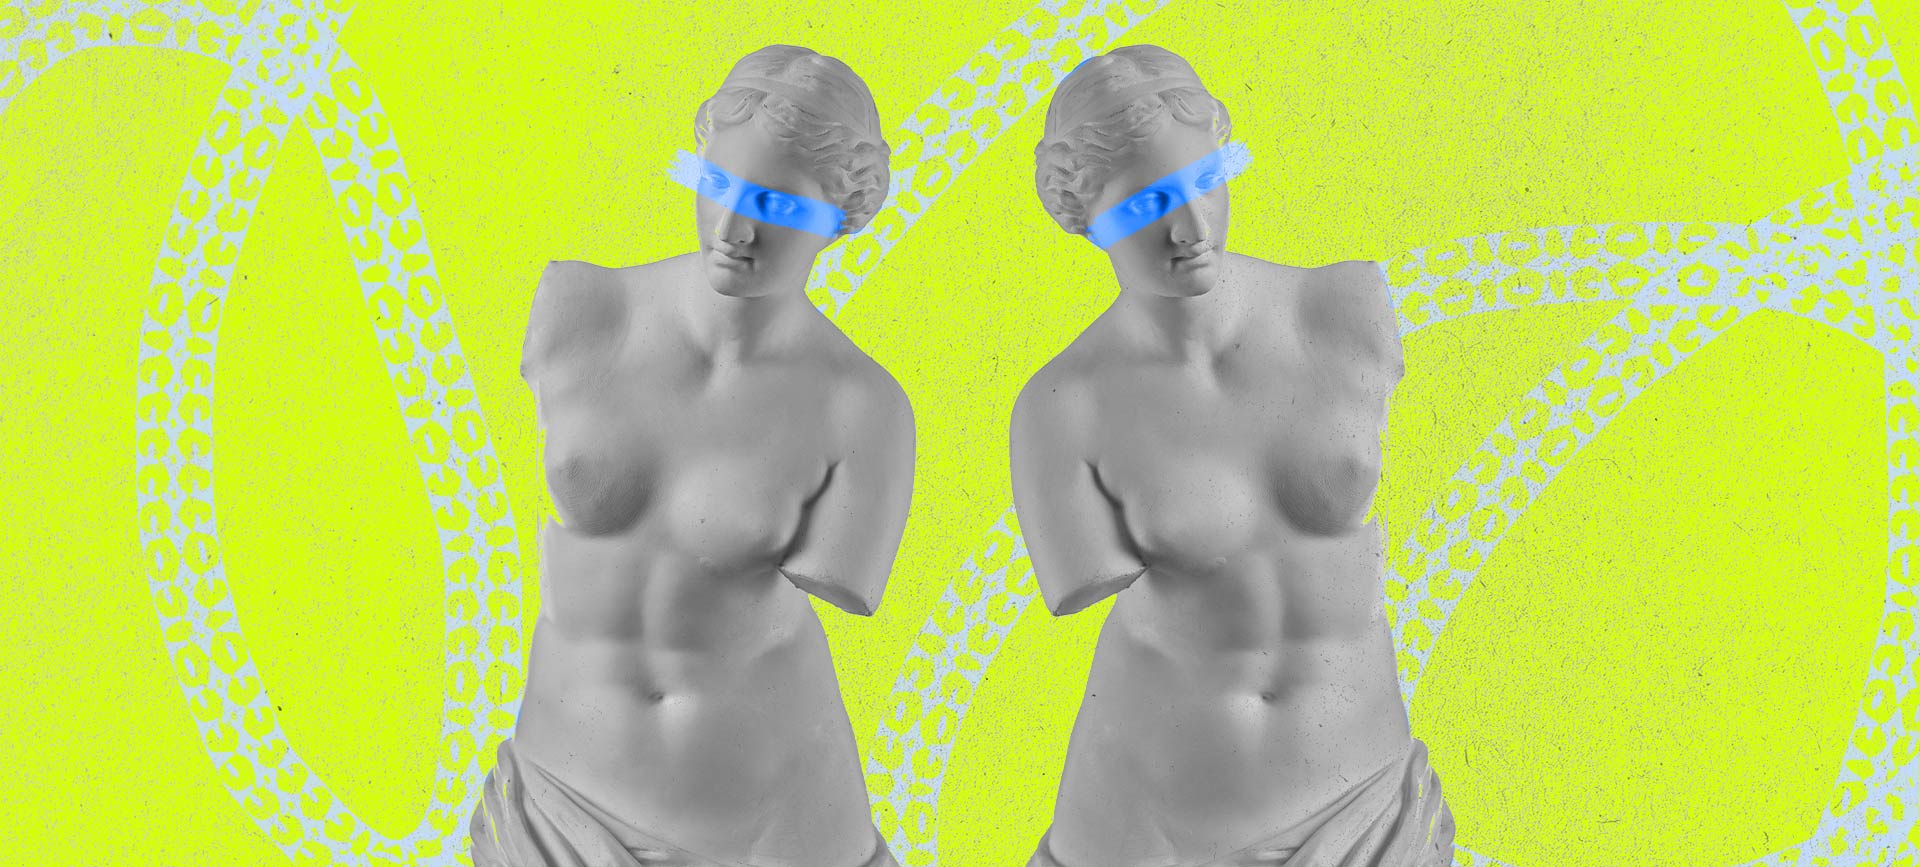 Two Roman statues stand next to each other facing opposite angles against a lime background with treads of DNA.